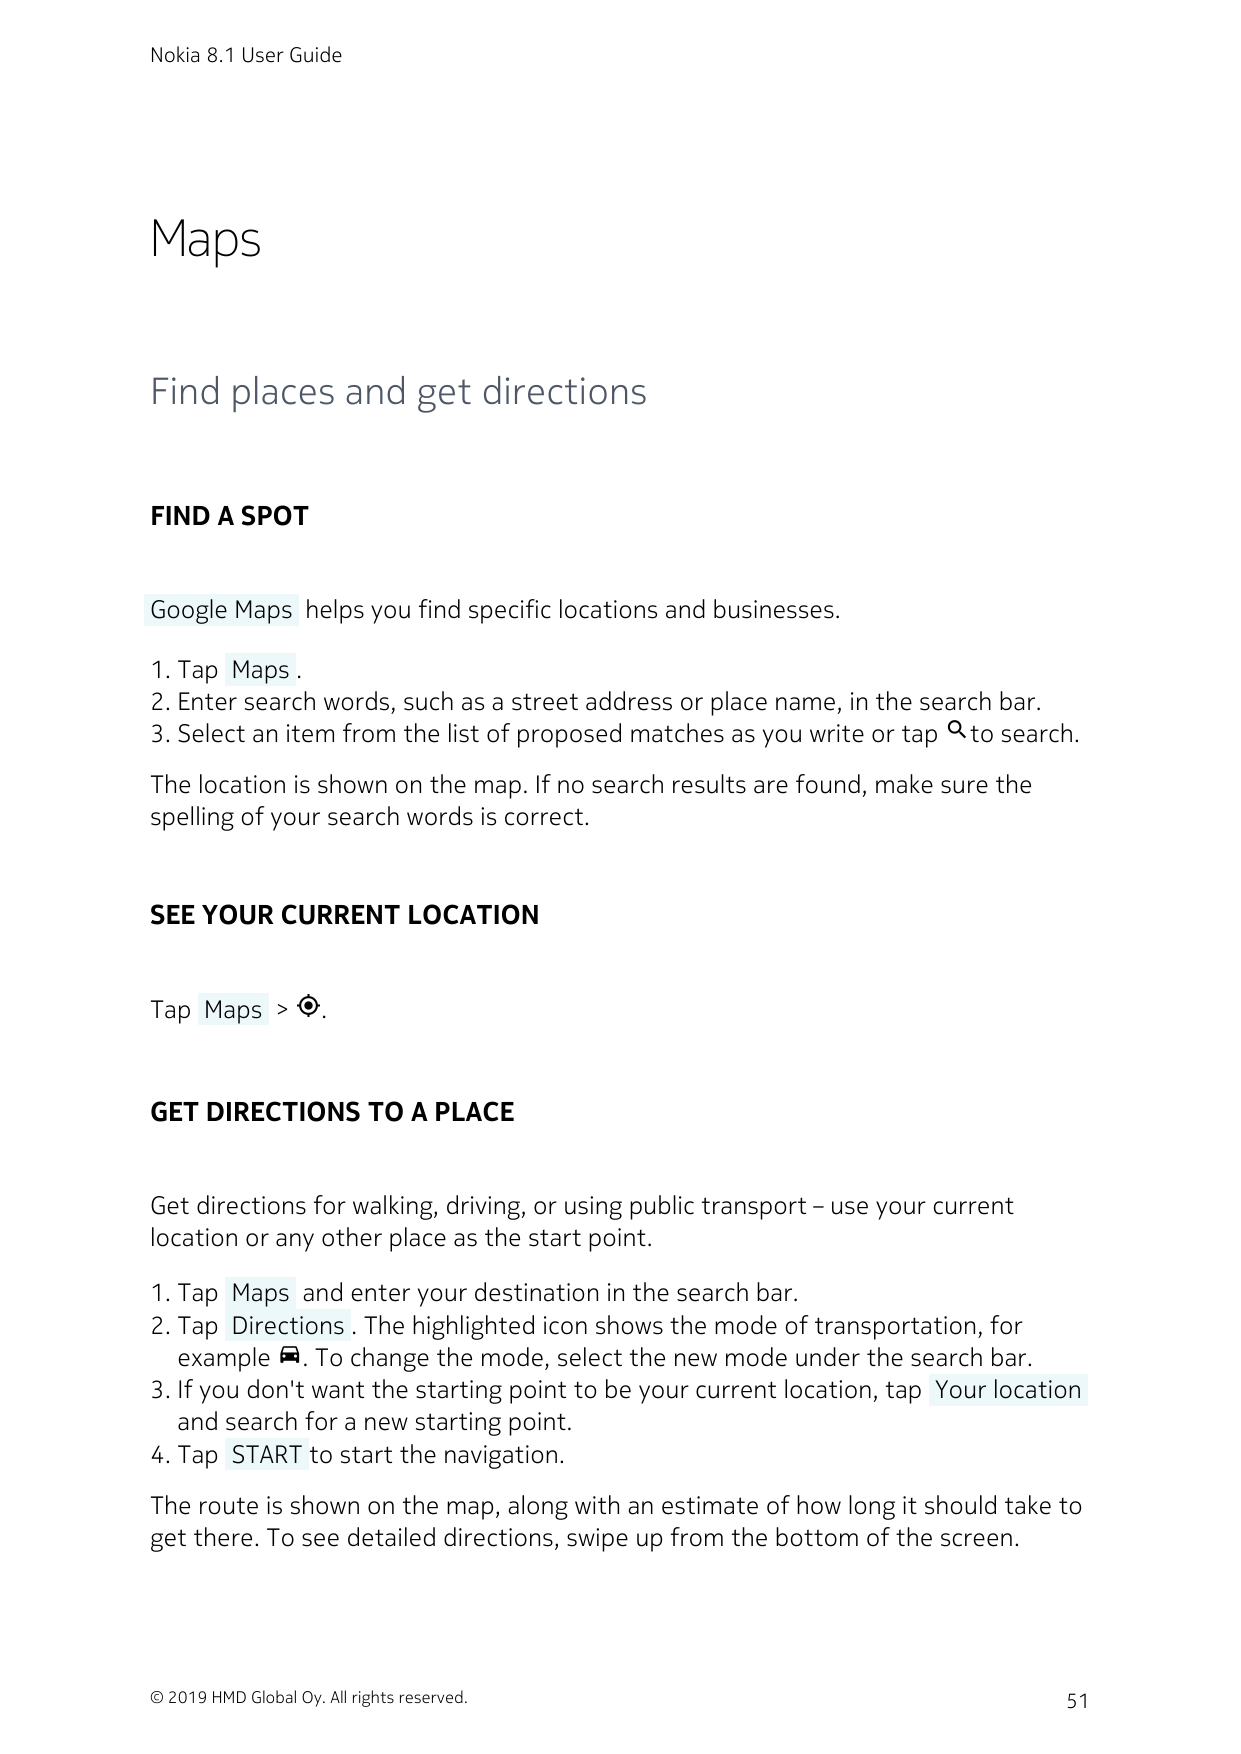 Nokia 8.1 User GuideMapsFind places and get directionsFIND A SPOT Google Maps  helps you find specific locations and businesses.